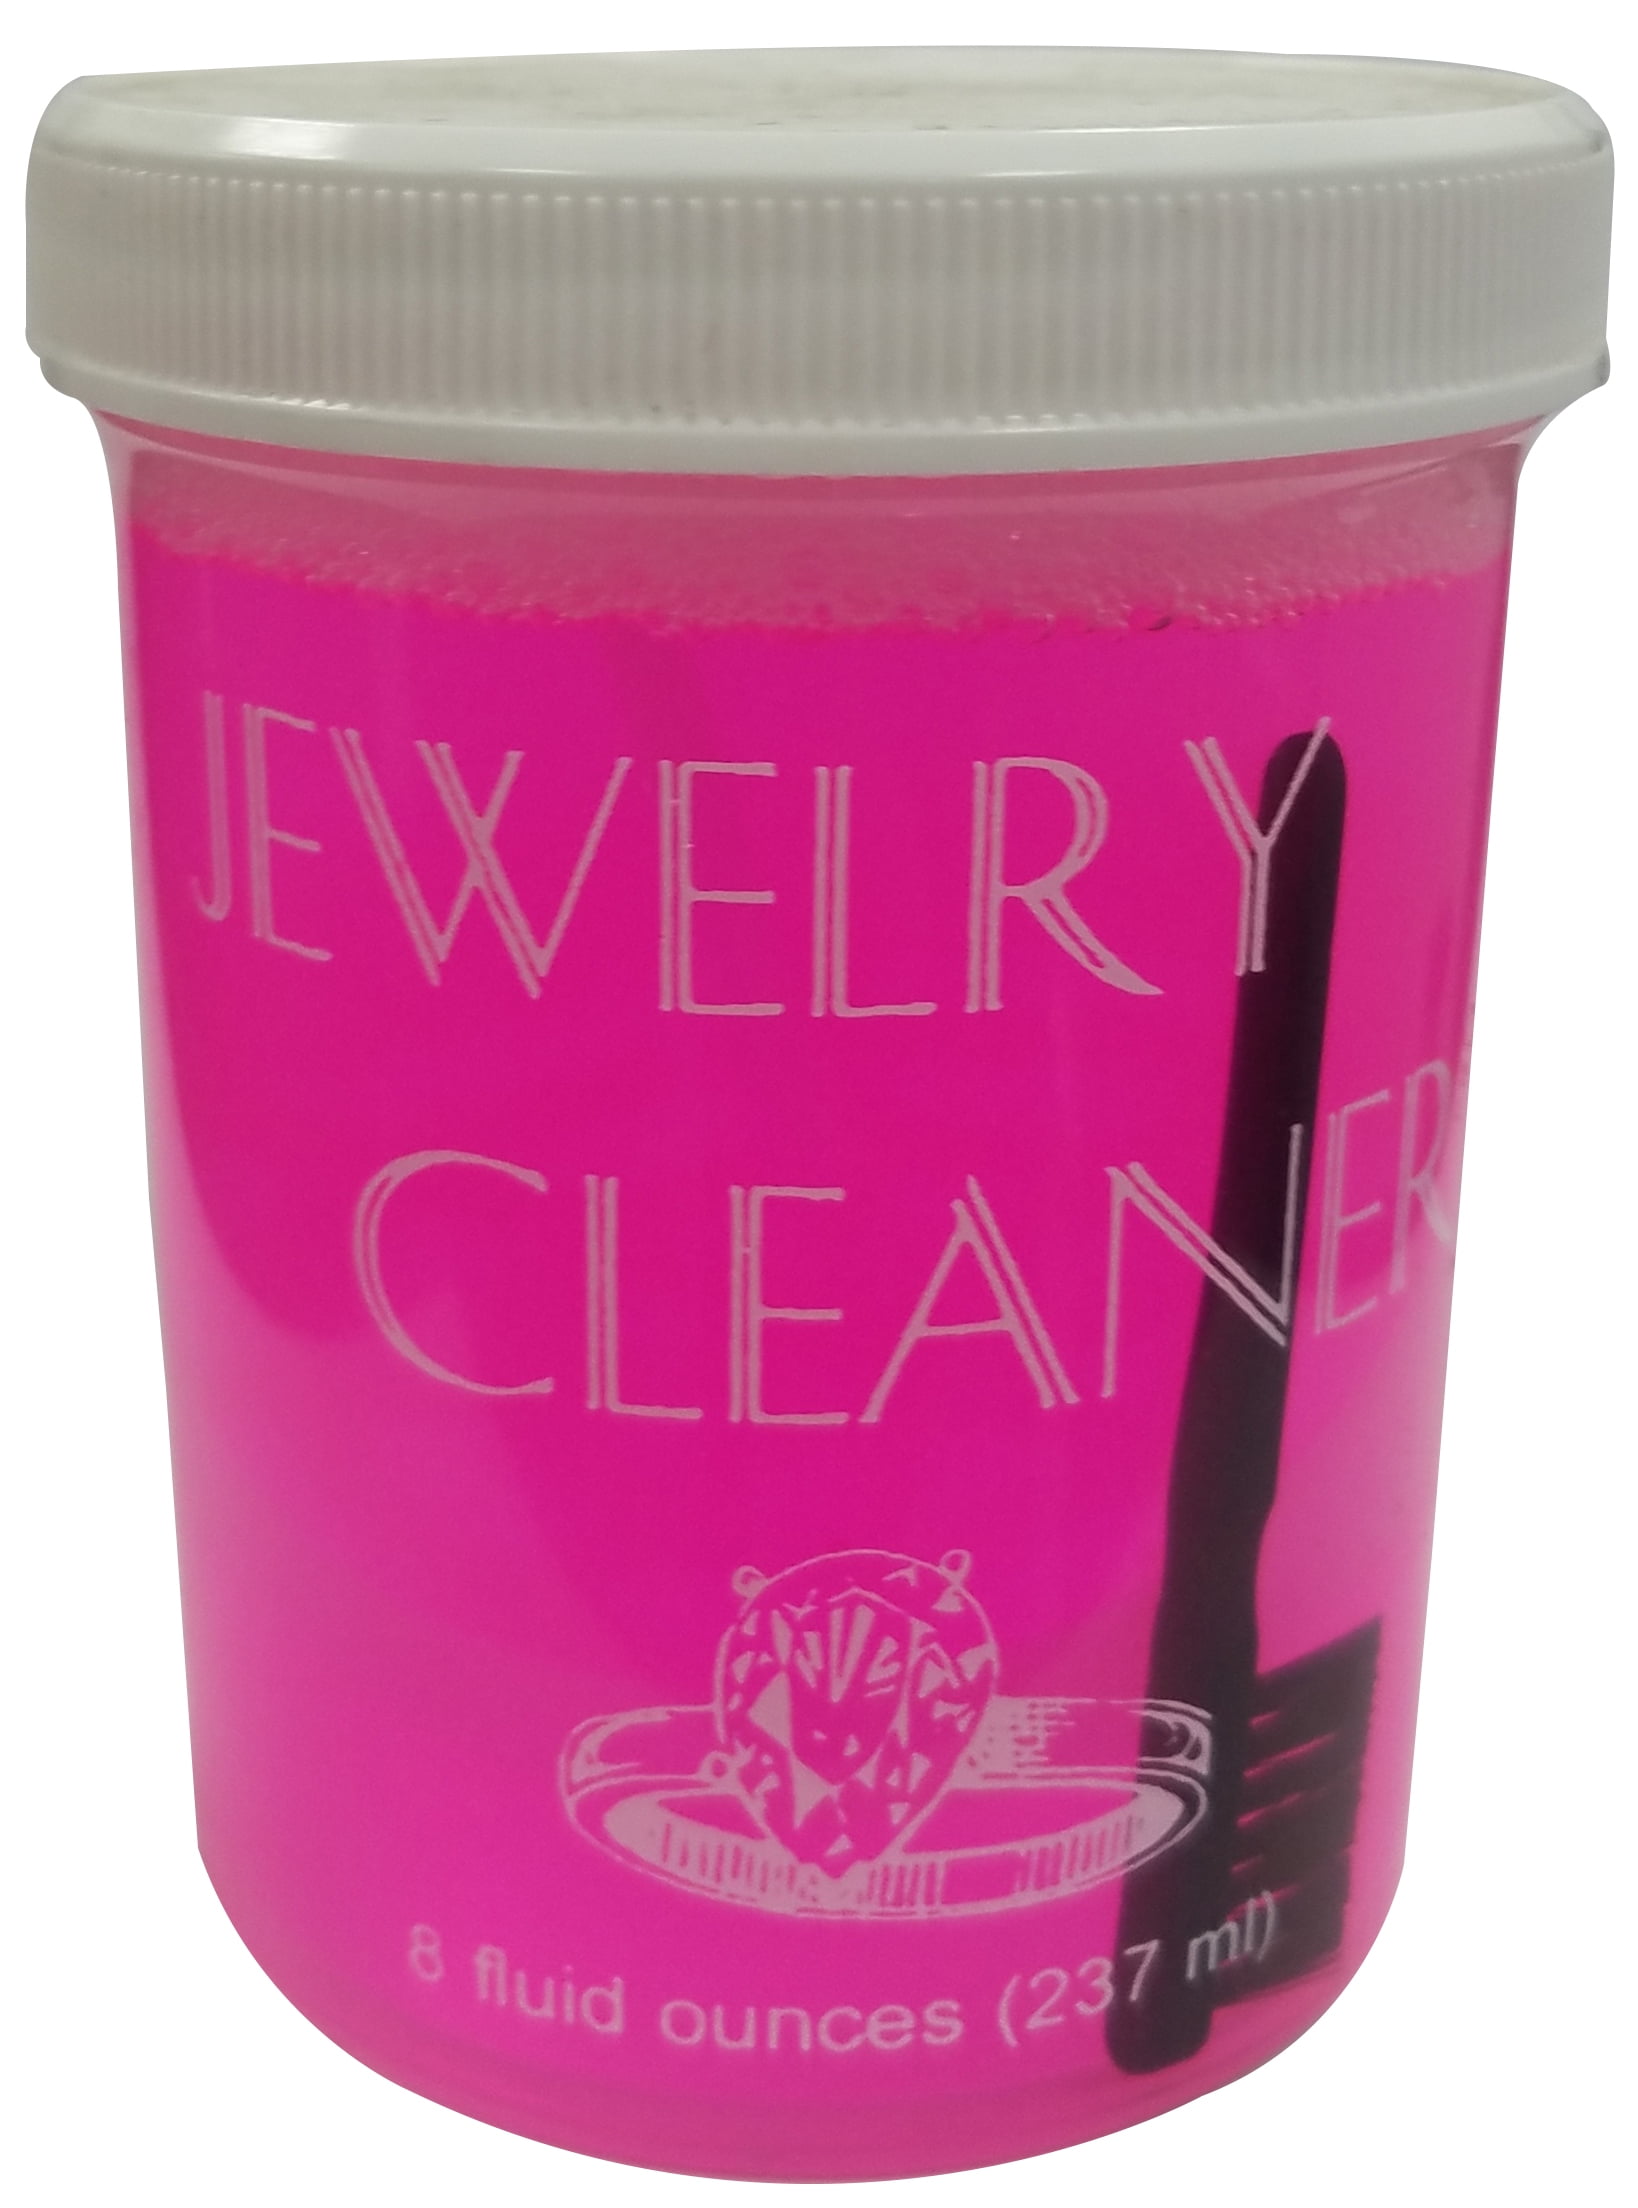 Weiman Fine Jewelry Liquid Cleaner With Polishing Cloth Included